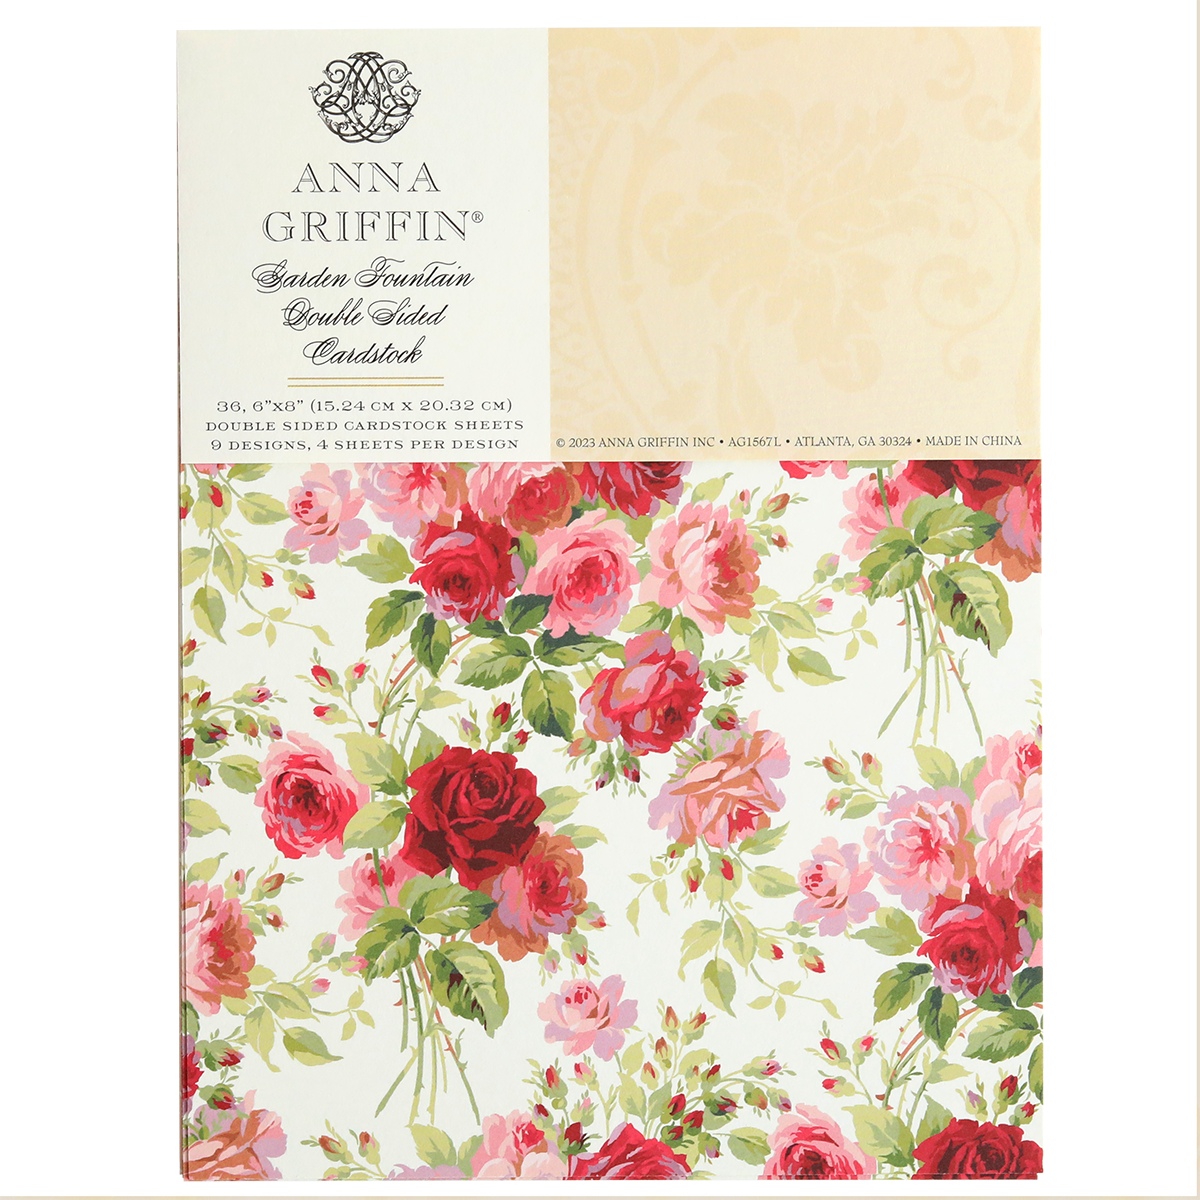 Anna Griffin Garden Fountain Double Sided Cardstock - perfect for paper crafting and creating beautiful cardstock layers.